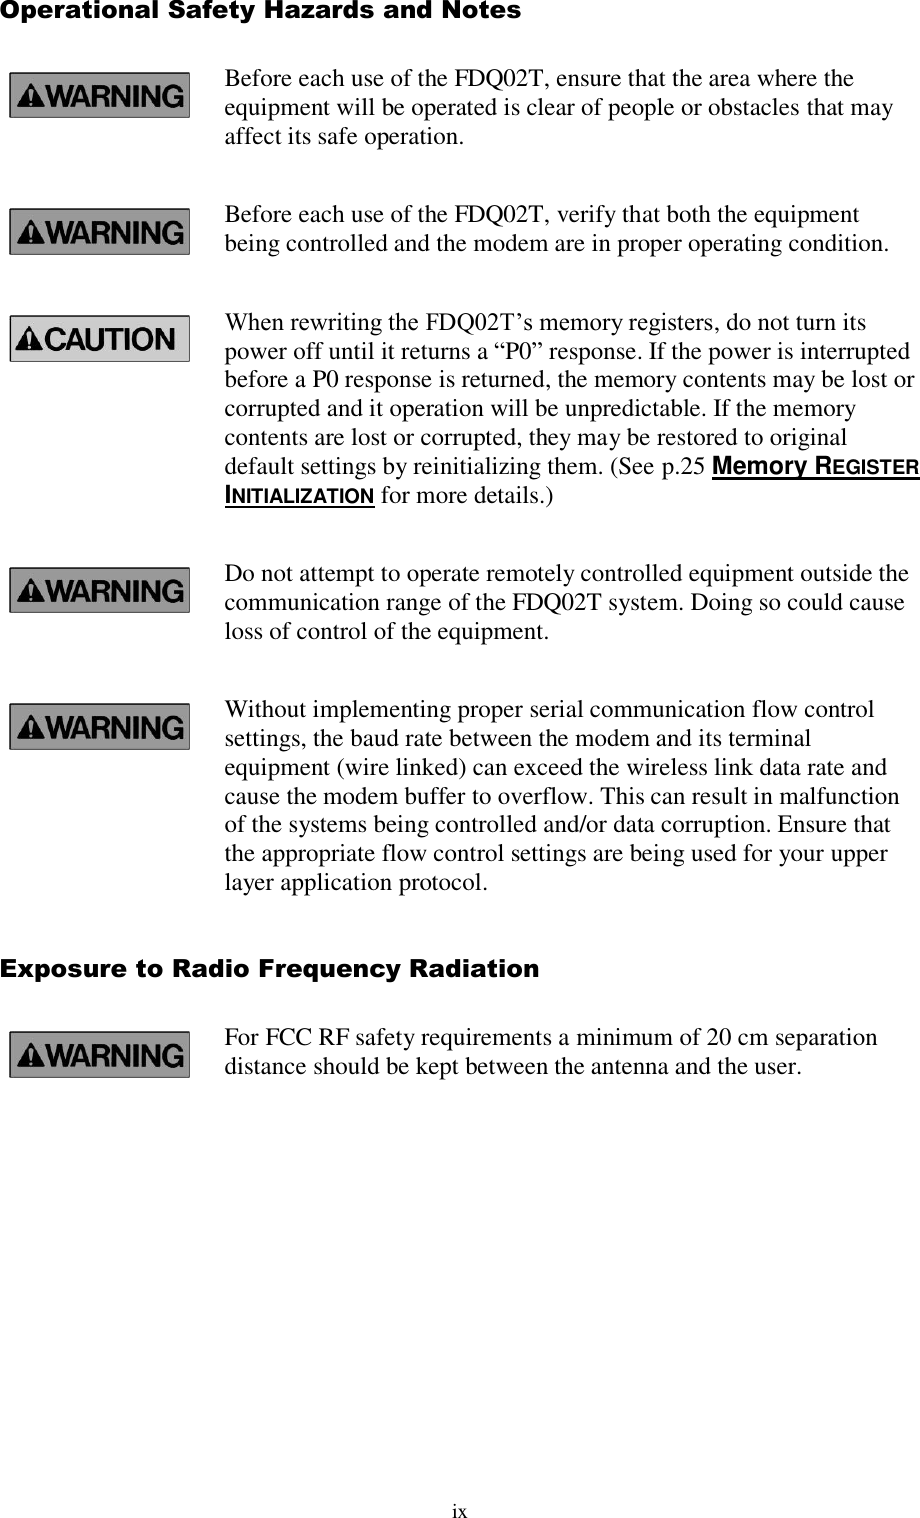  ix Operational Safety Hazards and Notes Before each use of the FDQ02T, ensure that the area where the equipment will be operated is clear of people or obstacles that may affect its safe operation. Before each use of the FDQ02T, verify that both the equipment being controlled and the modem are in proper operating condition. When rewriting the FDQ02T’s memory registers, do not turn its power off until it returns a “P0” response. If the power is interrupted before a P0 response is returned, the memory contents may be lost or corrupted and it operation will be unpredictable. If the memory contents are lost or corrupted, they may be restored to original default settings by reinitializing them. (See p.25 Memory REGISTER INITIALIZATION for more details.) Do not attempt to operate remotely controlled equipment outside the communication range of the FDQ02T system. Doing so could cause loss of control of the equipment. Without implementing proper serial communication flow control settings, the baud rate between the modem and its terminal equipment (wire linked) can exceed the wireless link data rate and cause the modem buffer to overflow. This can result in malfunction of the systems being controlled and/or data corruption. Ensure that the appropriate flow control settings are being used for your upper layer application protocol. Exposure to Radio Frequency Radiation For FCC RF safety requirements a minimum of 20 cm separation distance should be kept between the antenna and the user.  